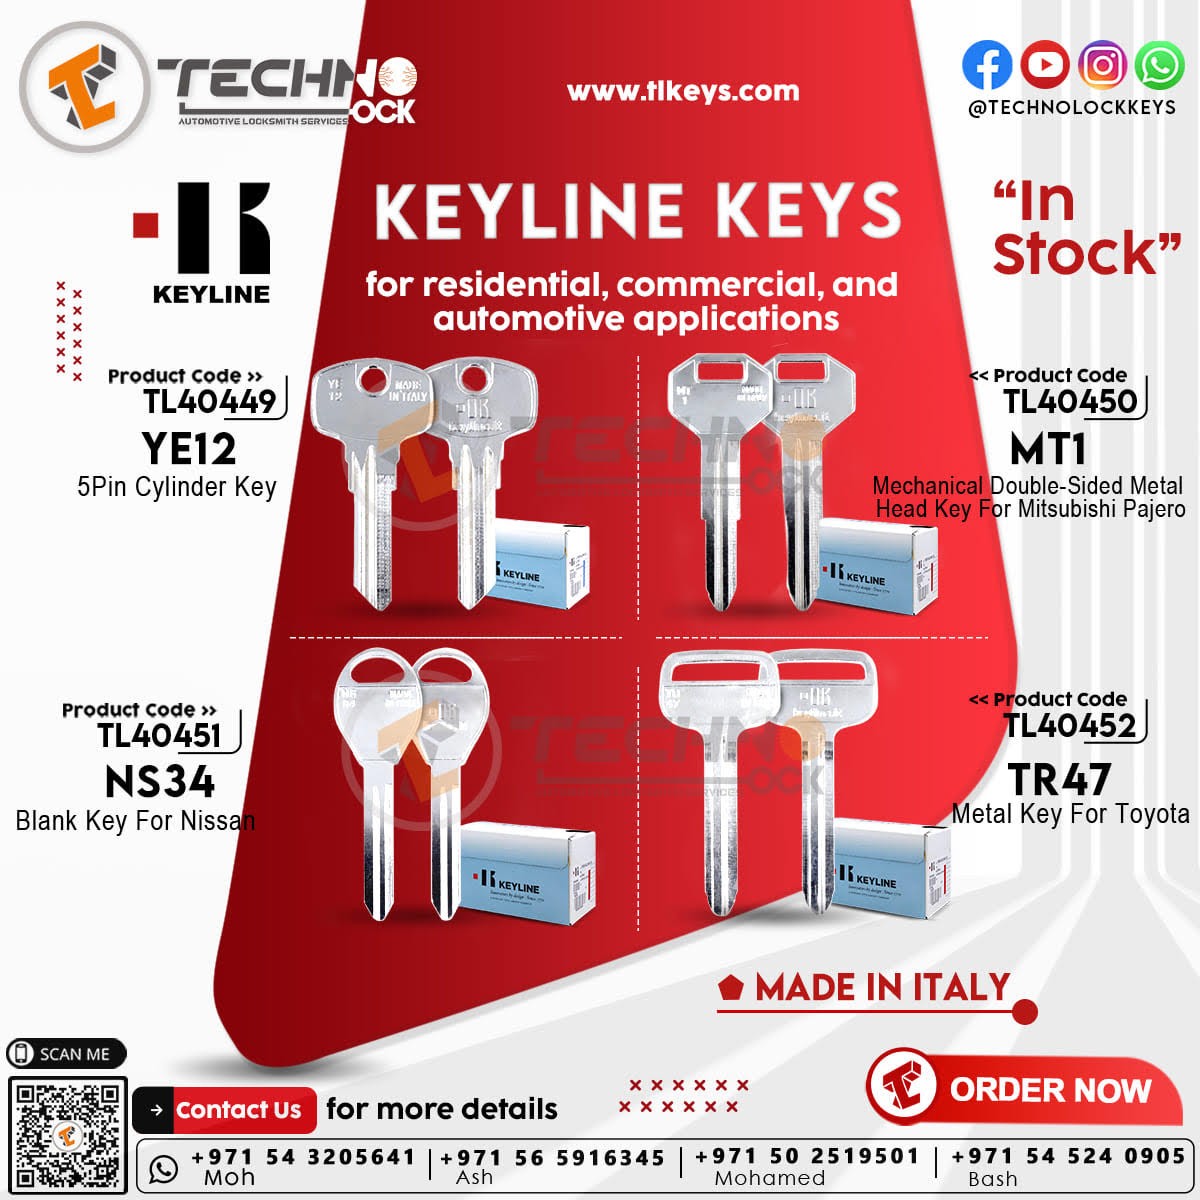 Display of Keyline keyline keys for residential, commercial, and automotive applications. The keys come in various shapes and sizes, suited for different lock types. Text on the image indicates the keys are in stock.